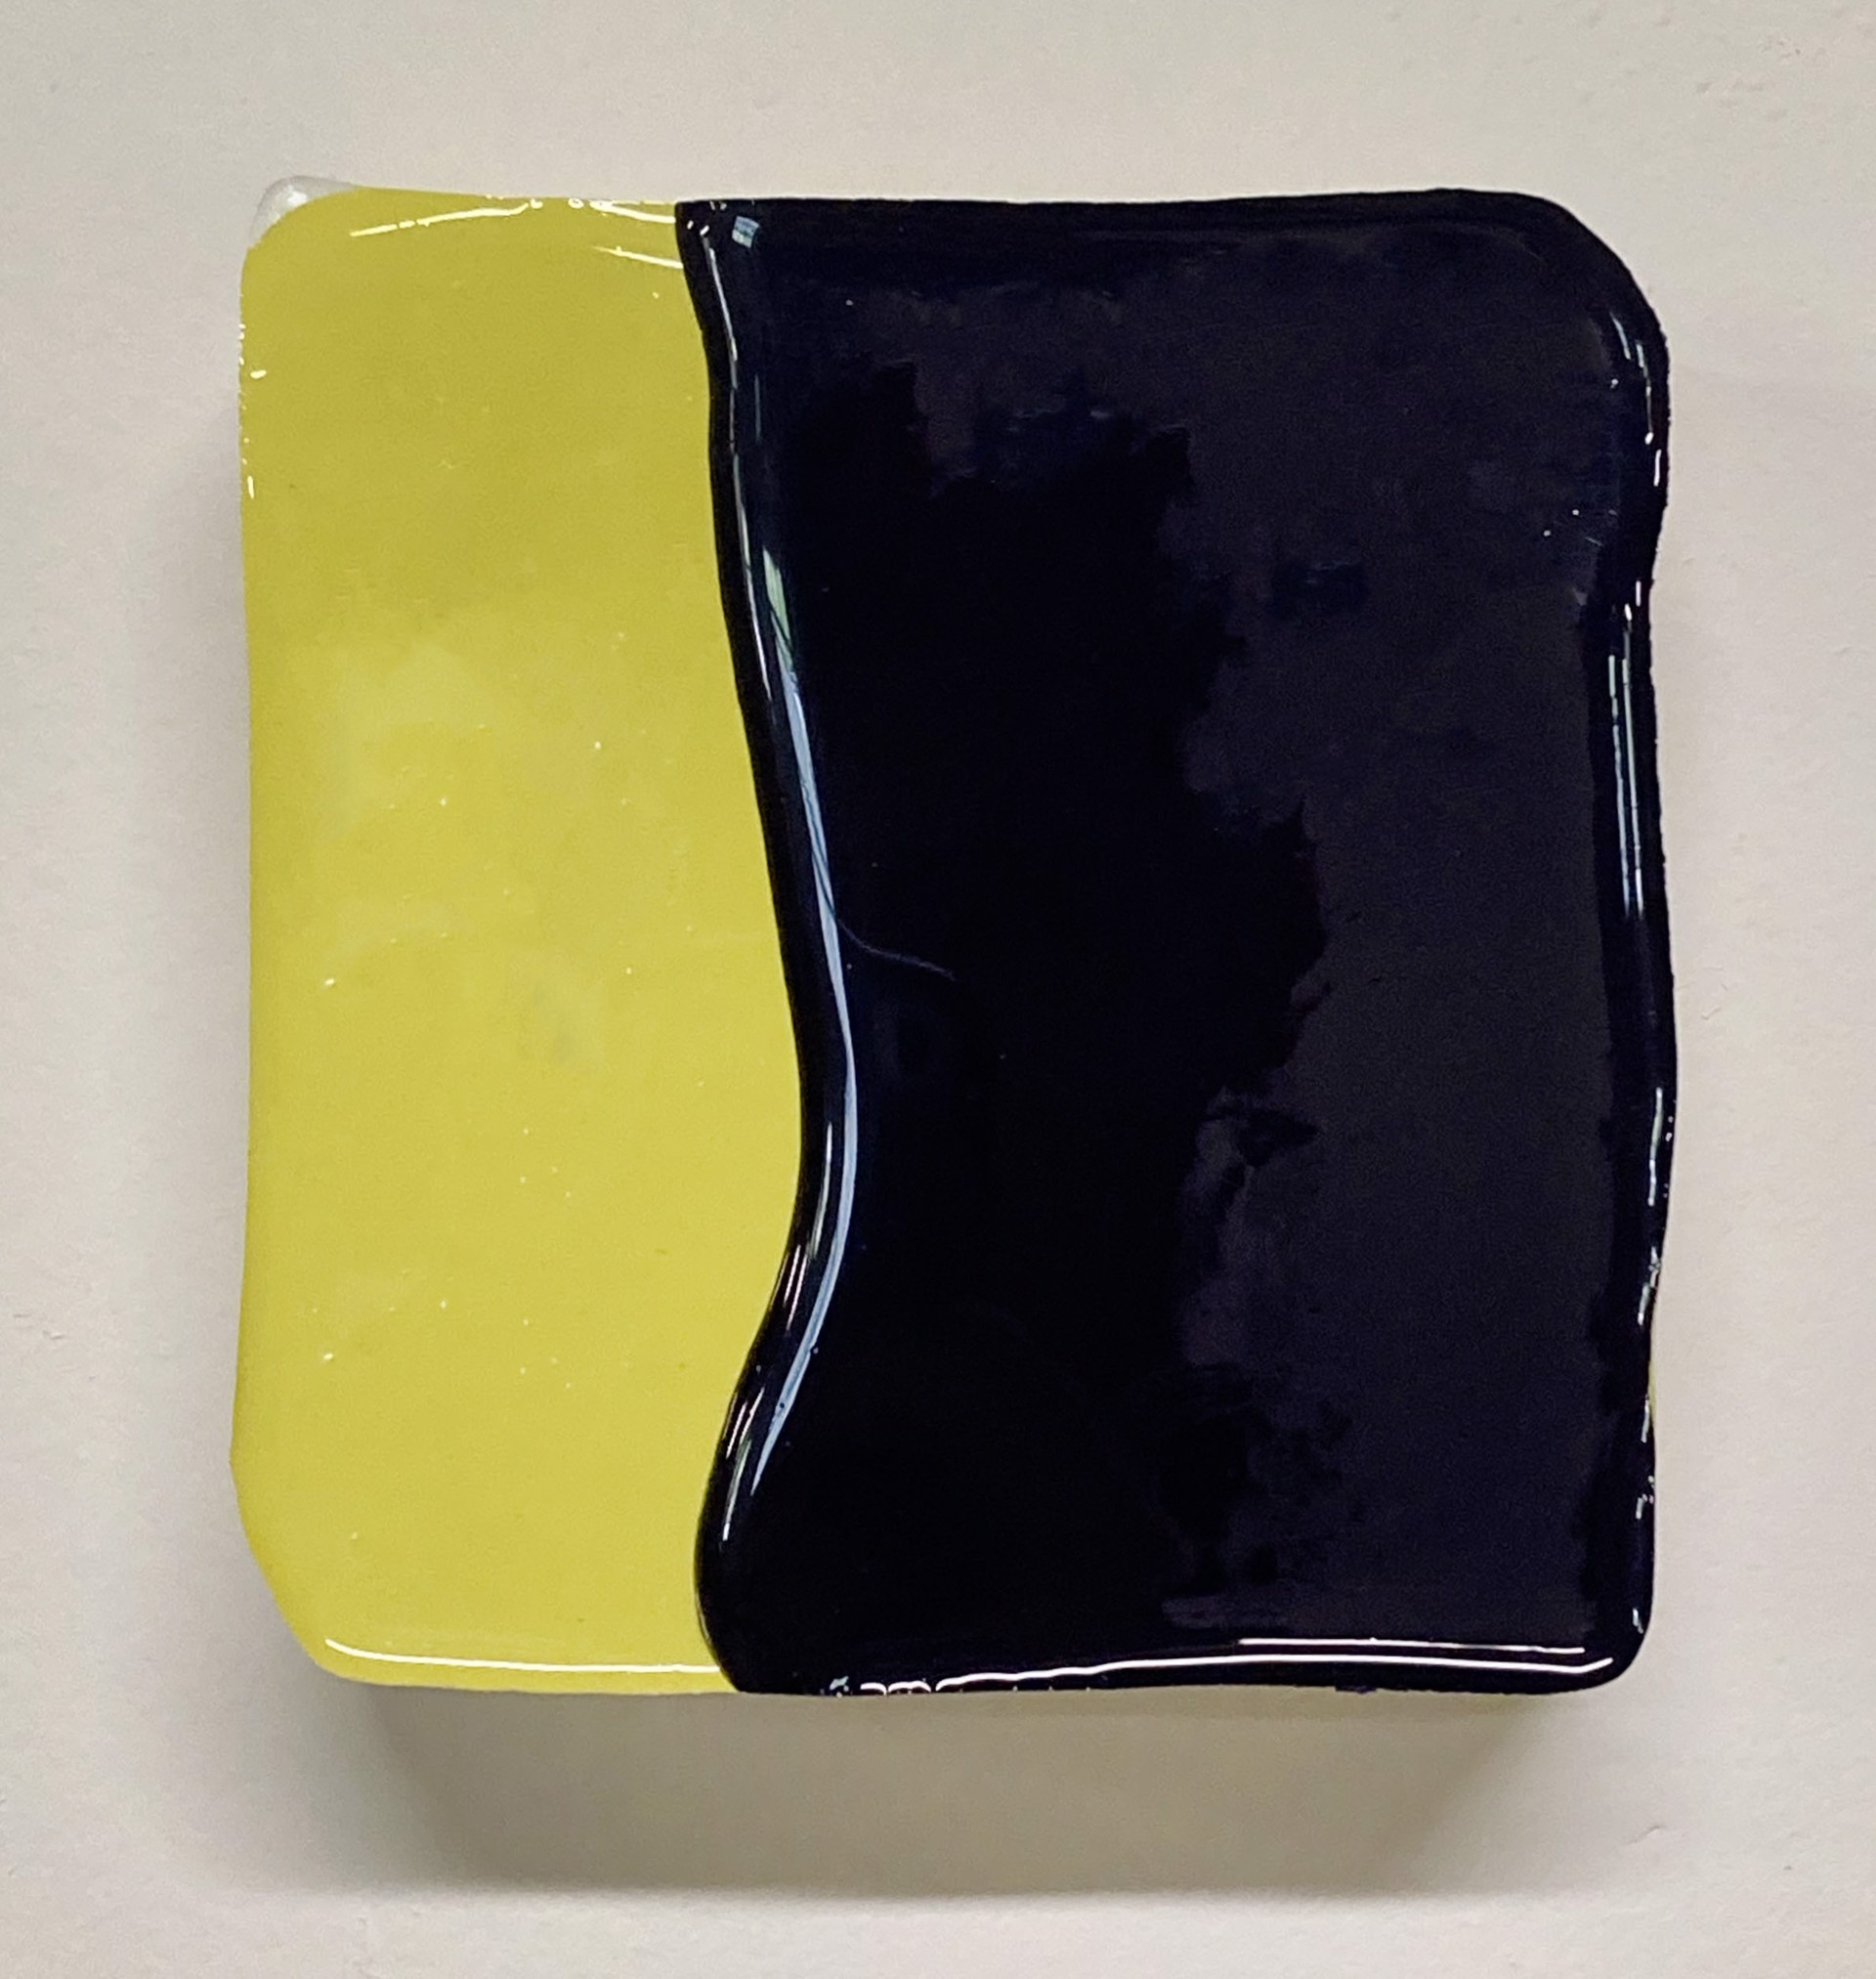 SOLD - Color Block 2 by Cameron Wilson Ritcher